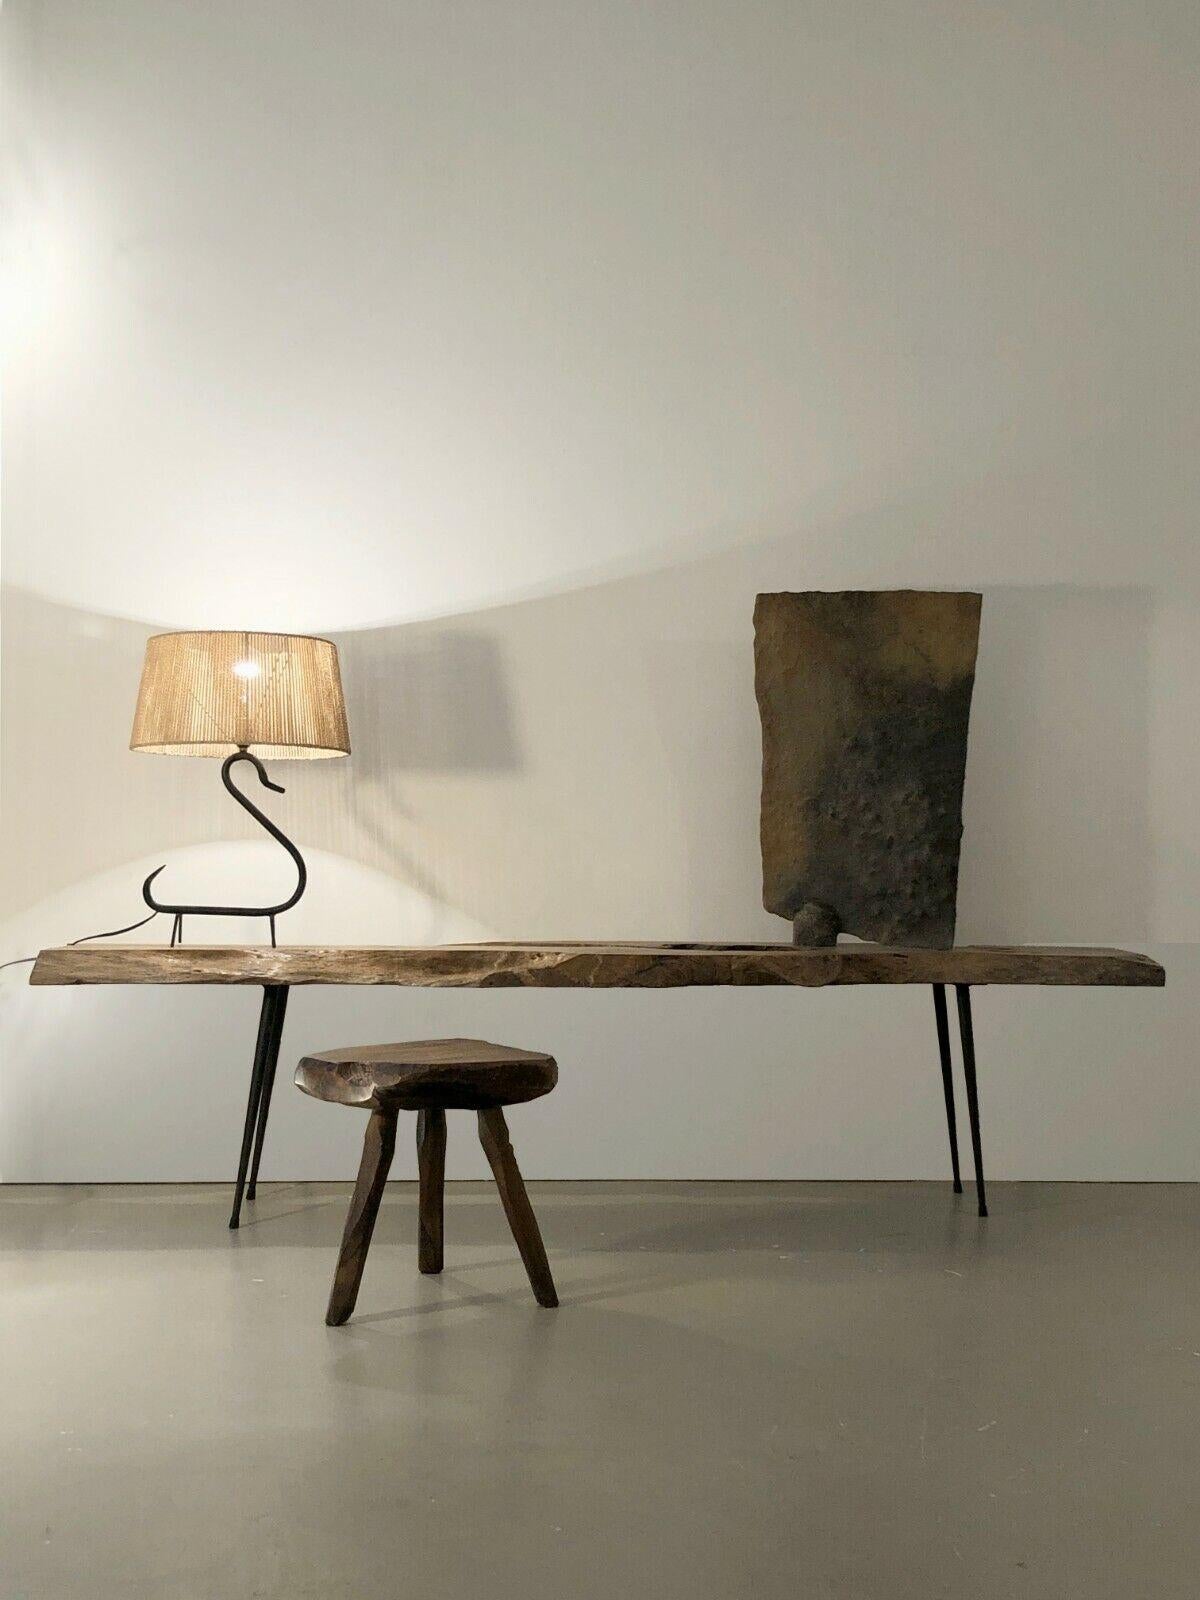 A spectacular low table or a side table (it can be used as a low console), Modernist, Brutalist, Forme-Libre, the tray being cut in a beautiful piece of a raw and massive wood depicting the natural silhouette of the tree, assembled on four metal